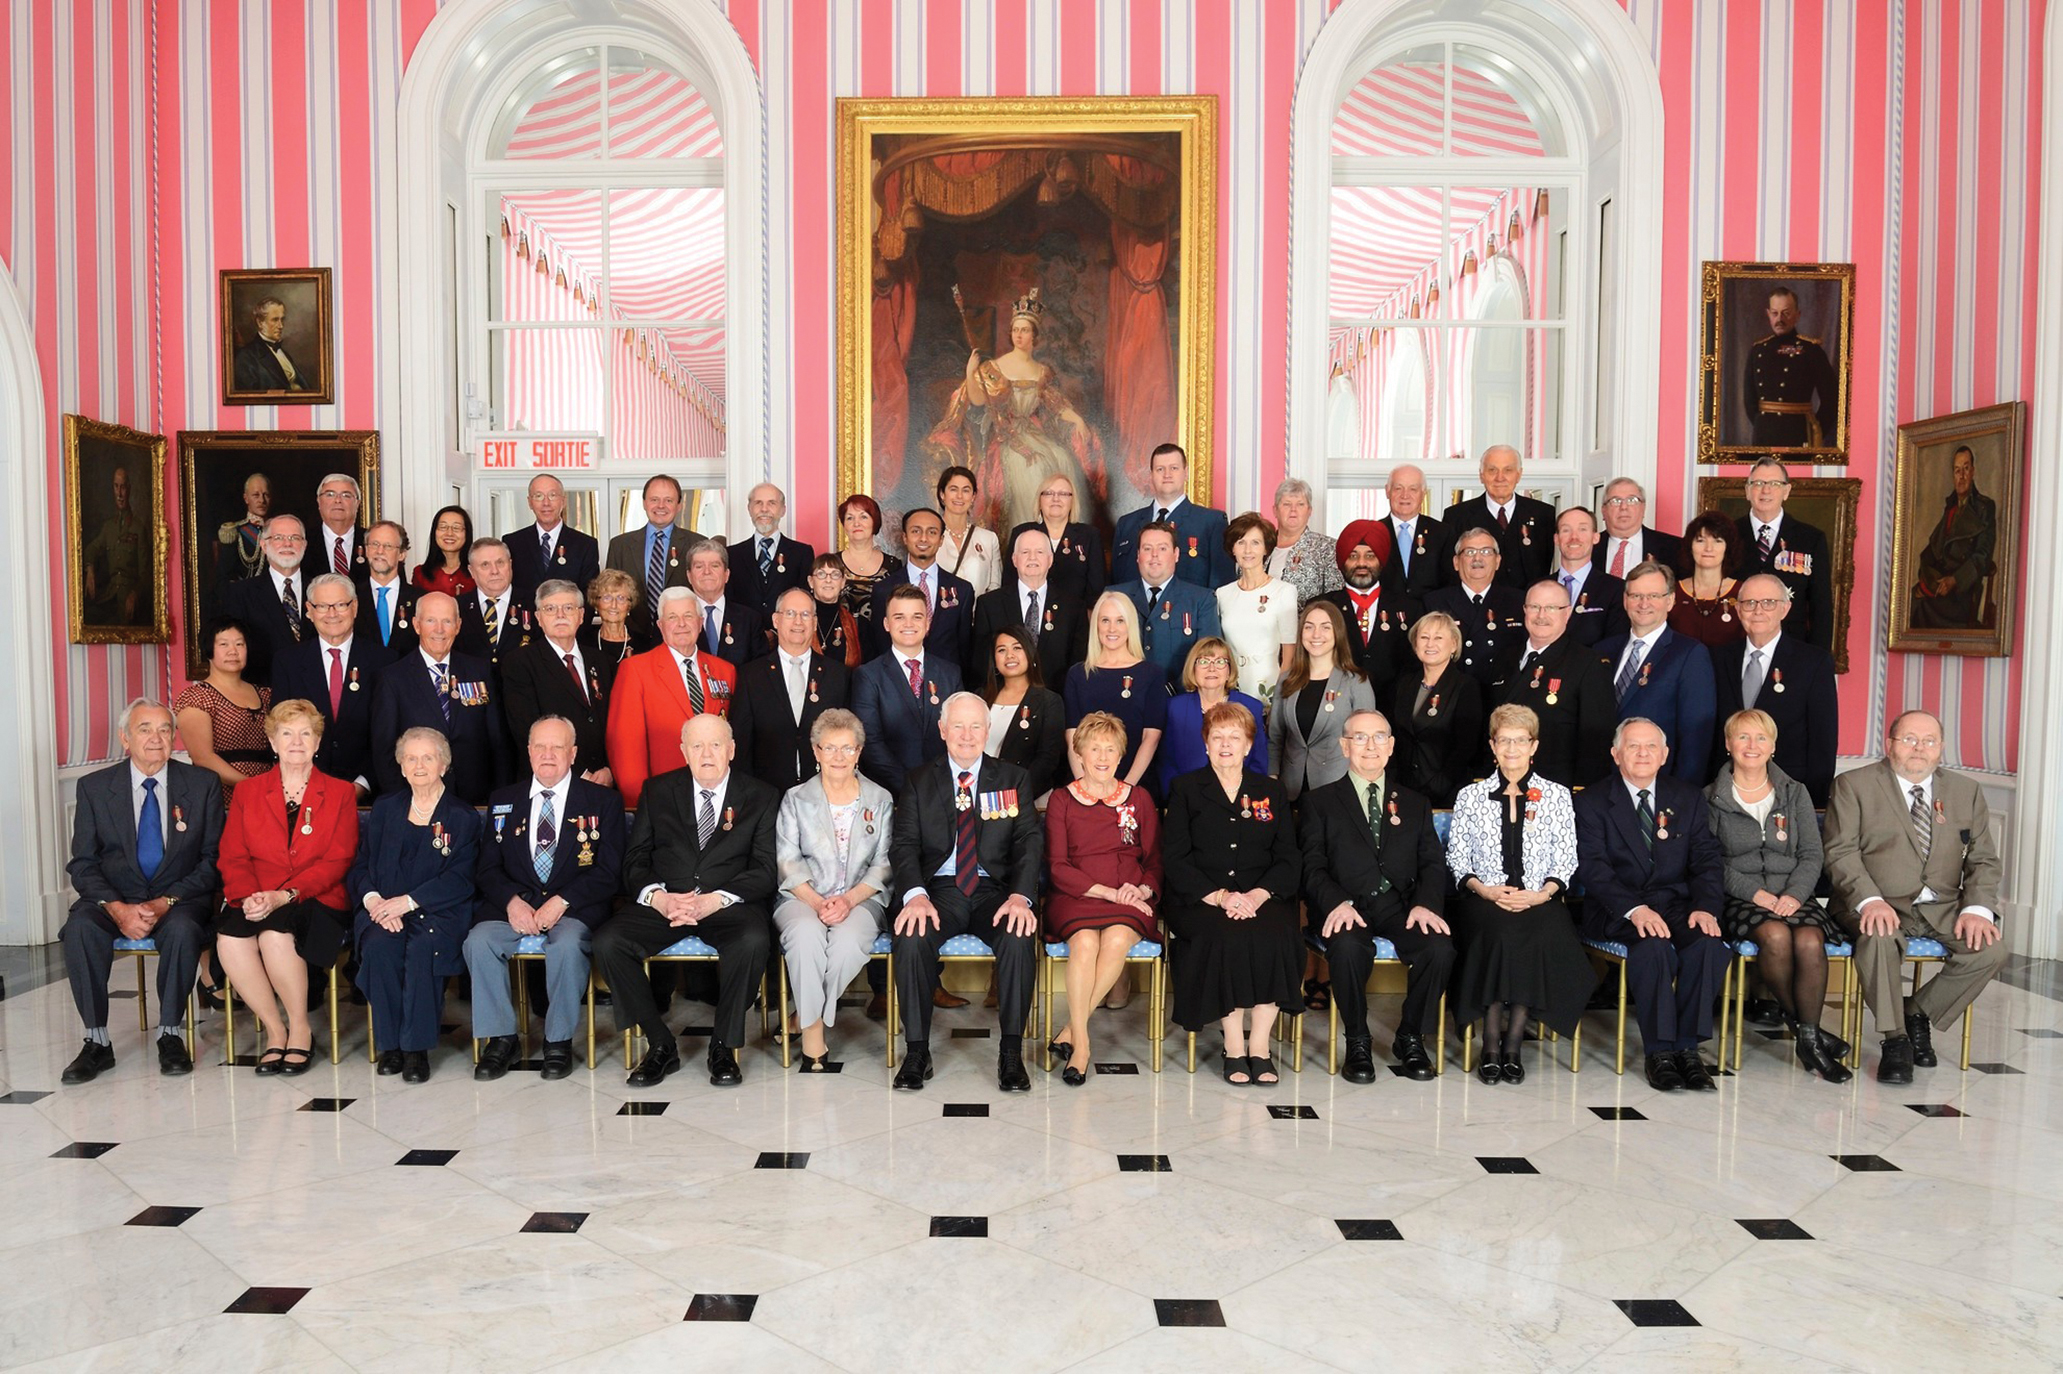 GG01-2016-0113-059 April 12, 2016 Rideau Hall, Ottawa, Canada.  His Excellency the Right Honourable David Johnston, Governor General of Canada, presided over the inaugural presentation ceremony of the Sovereignís Medal for Volunteers on Tuesday, April 12, 2016, at Rideau Hall.The new medal was presented to 55 Canadians to recognize exceptional volunteer achievements in a wide range of fields.  Credit: Sgt Ronald Duchesne, Rideau Hall, OSGG